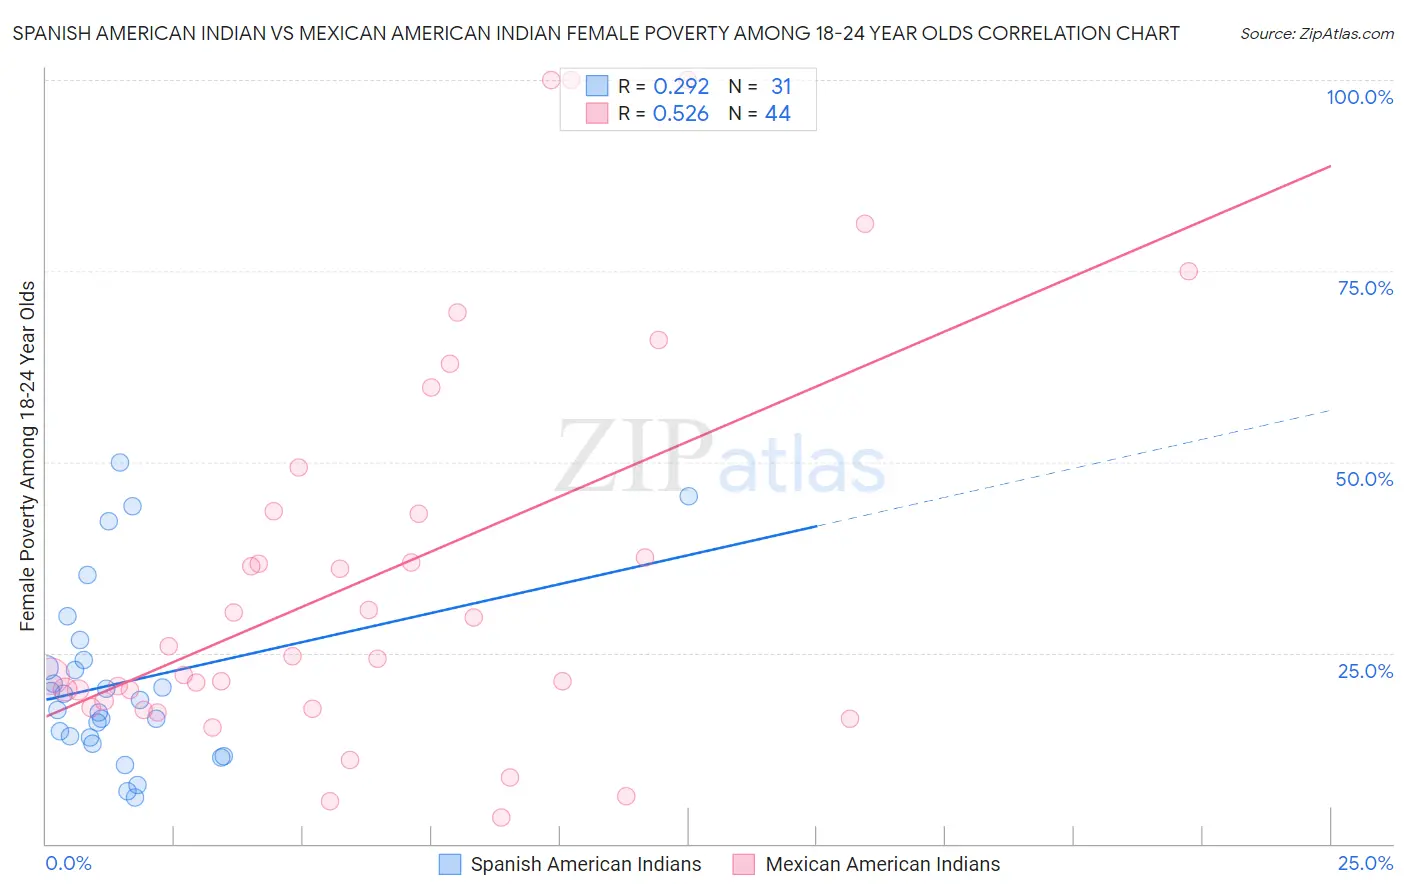 Spanish American Indian vs Mexican American Indian Female Poverty Among 18-24 Year Olds